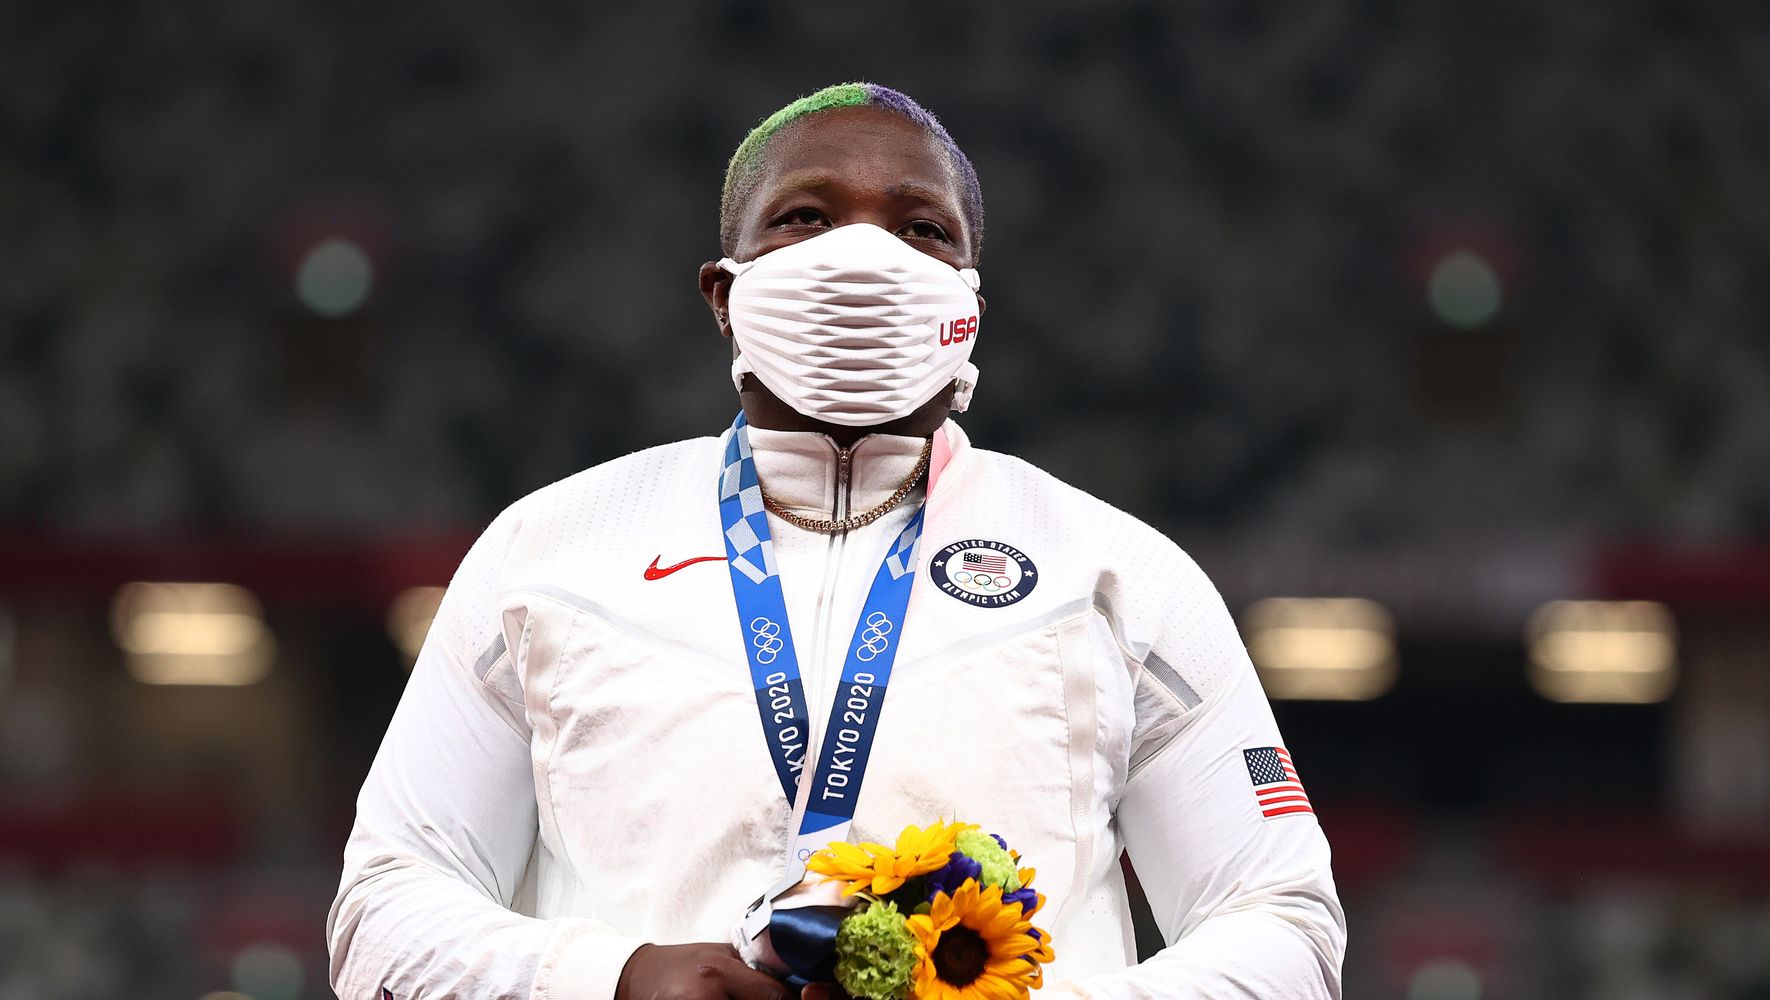 Olympian Raven Saunders' Mother Dies Days After Her Silver Medal Win